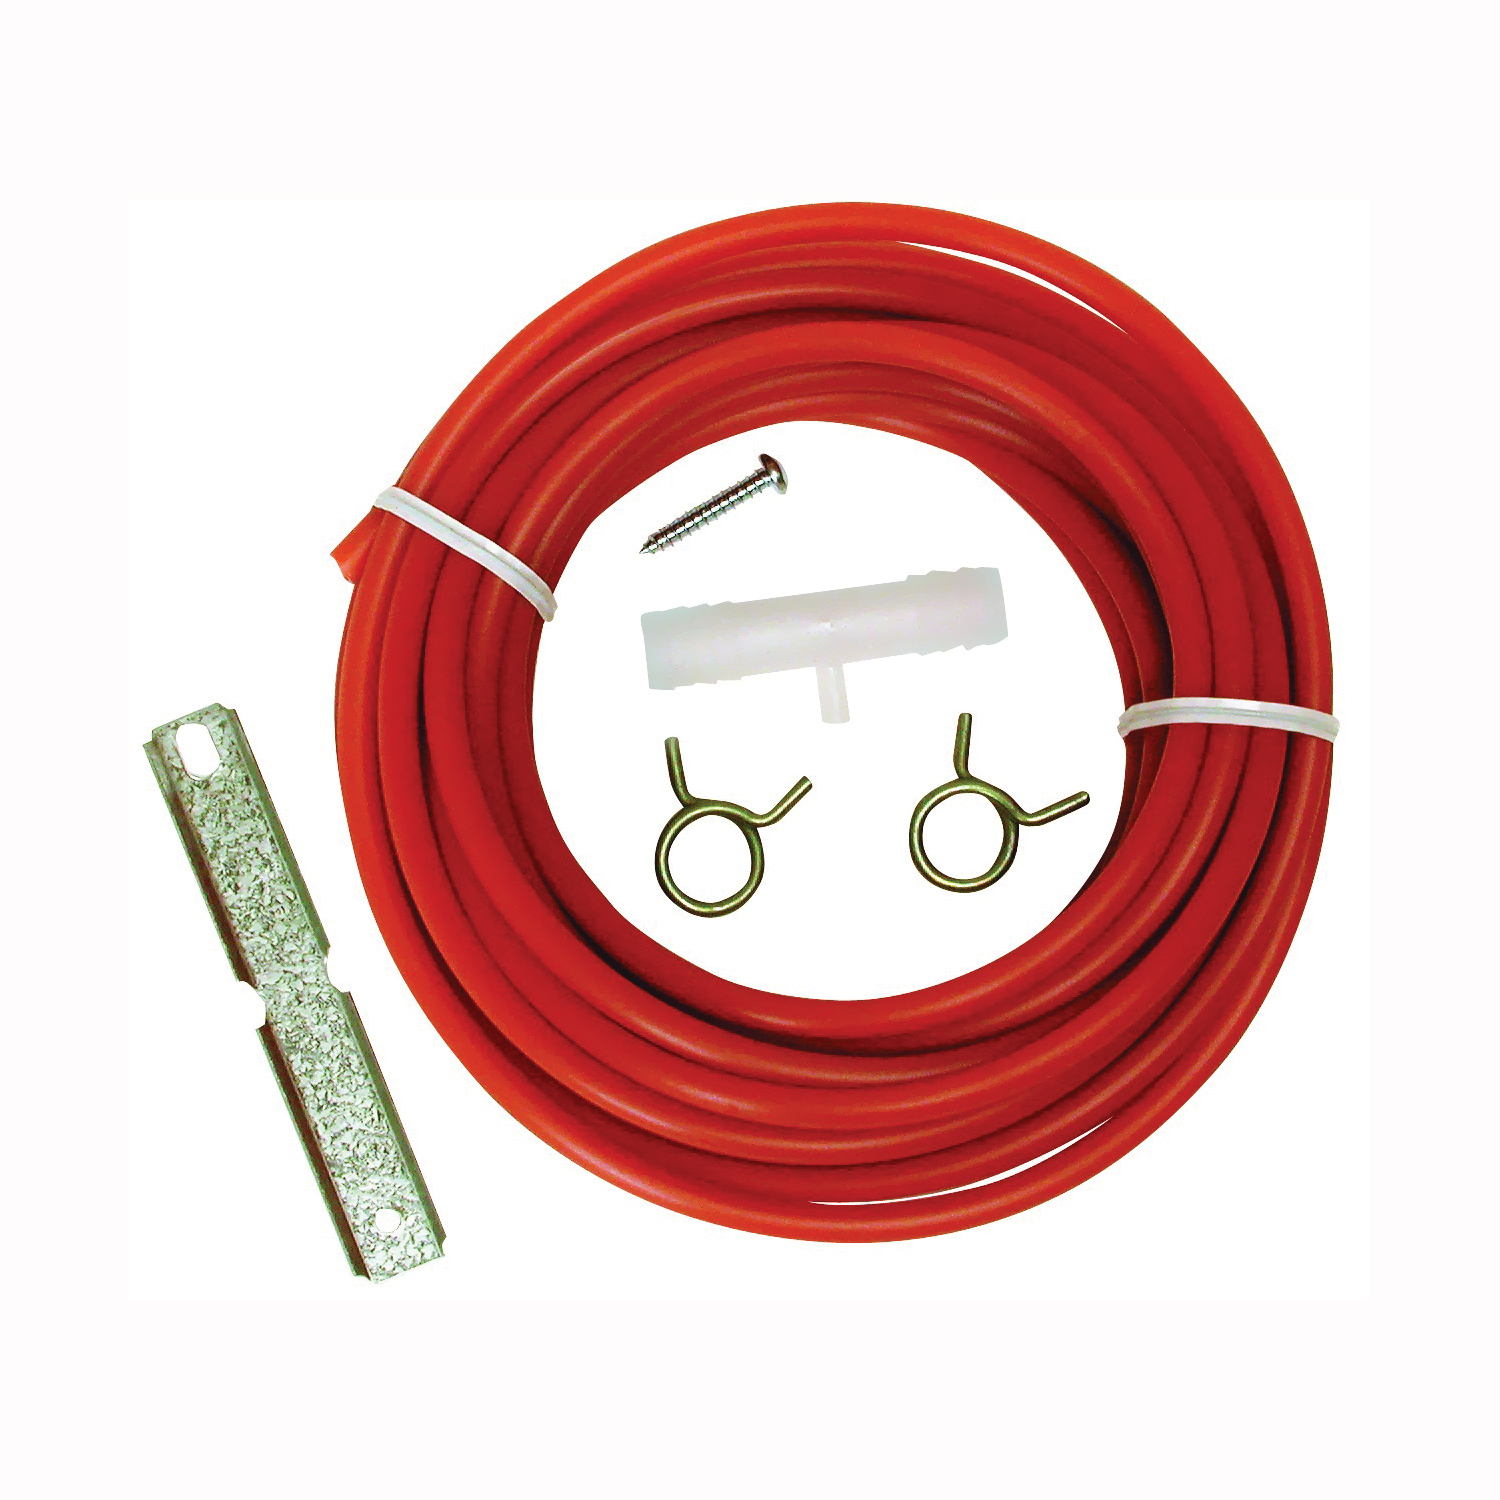 5011 Bleed-Off Kit, Copper/Polyethylene, For: Evaporative Cooler Purge Systems